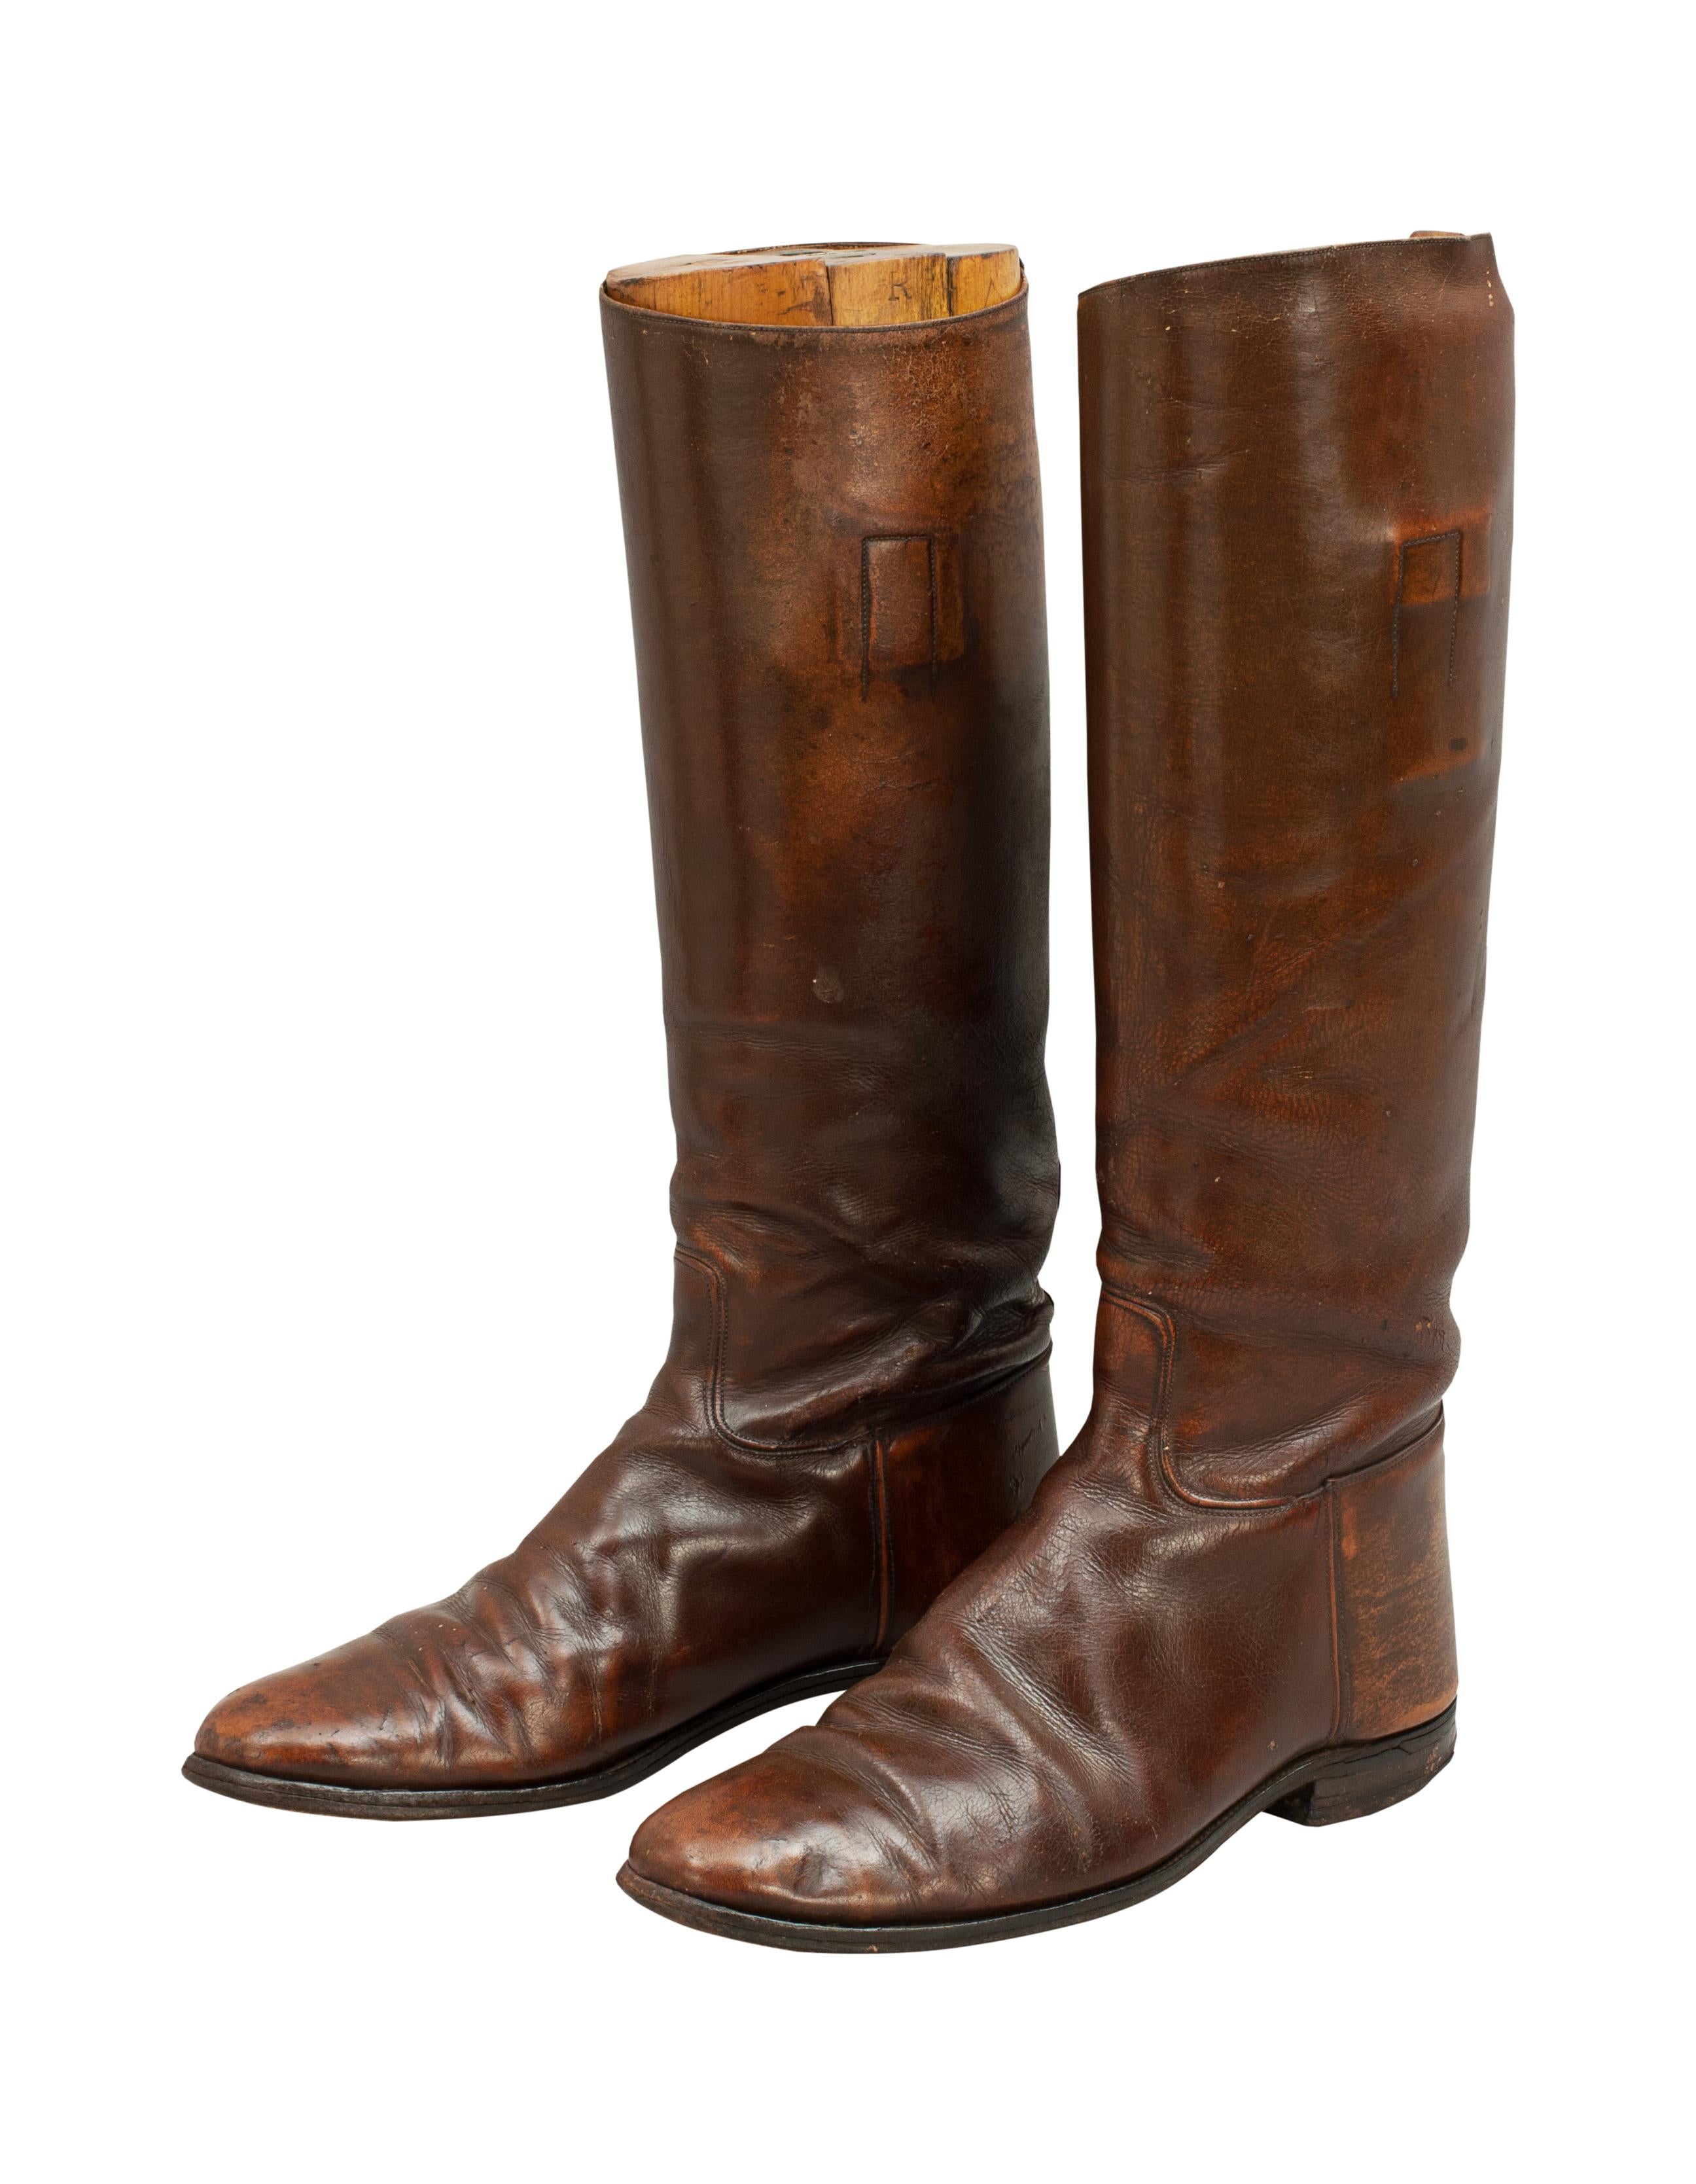 Brown leather riding boots.
A pair of English brown leather riding boots with wooden trees. The trees do not have handles and are not original to the boots. A great decorative pair of riding boots.